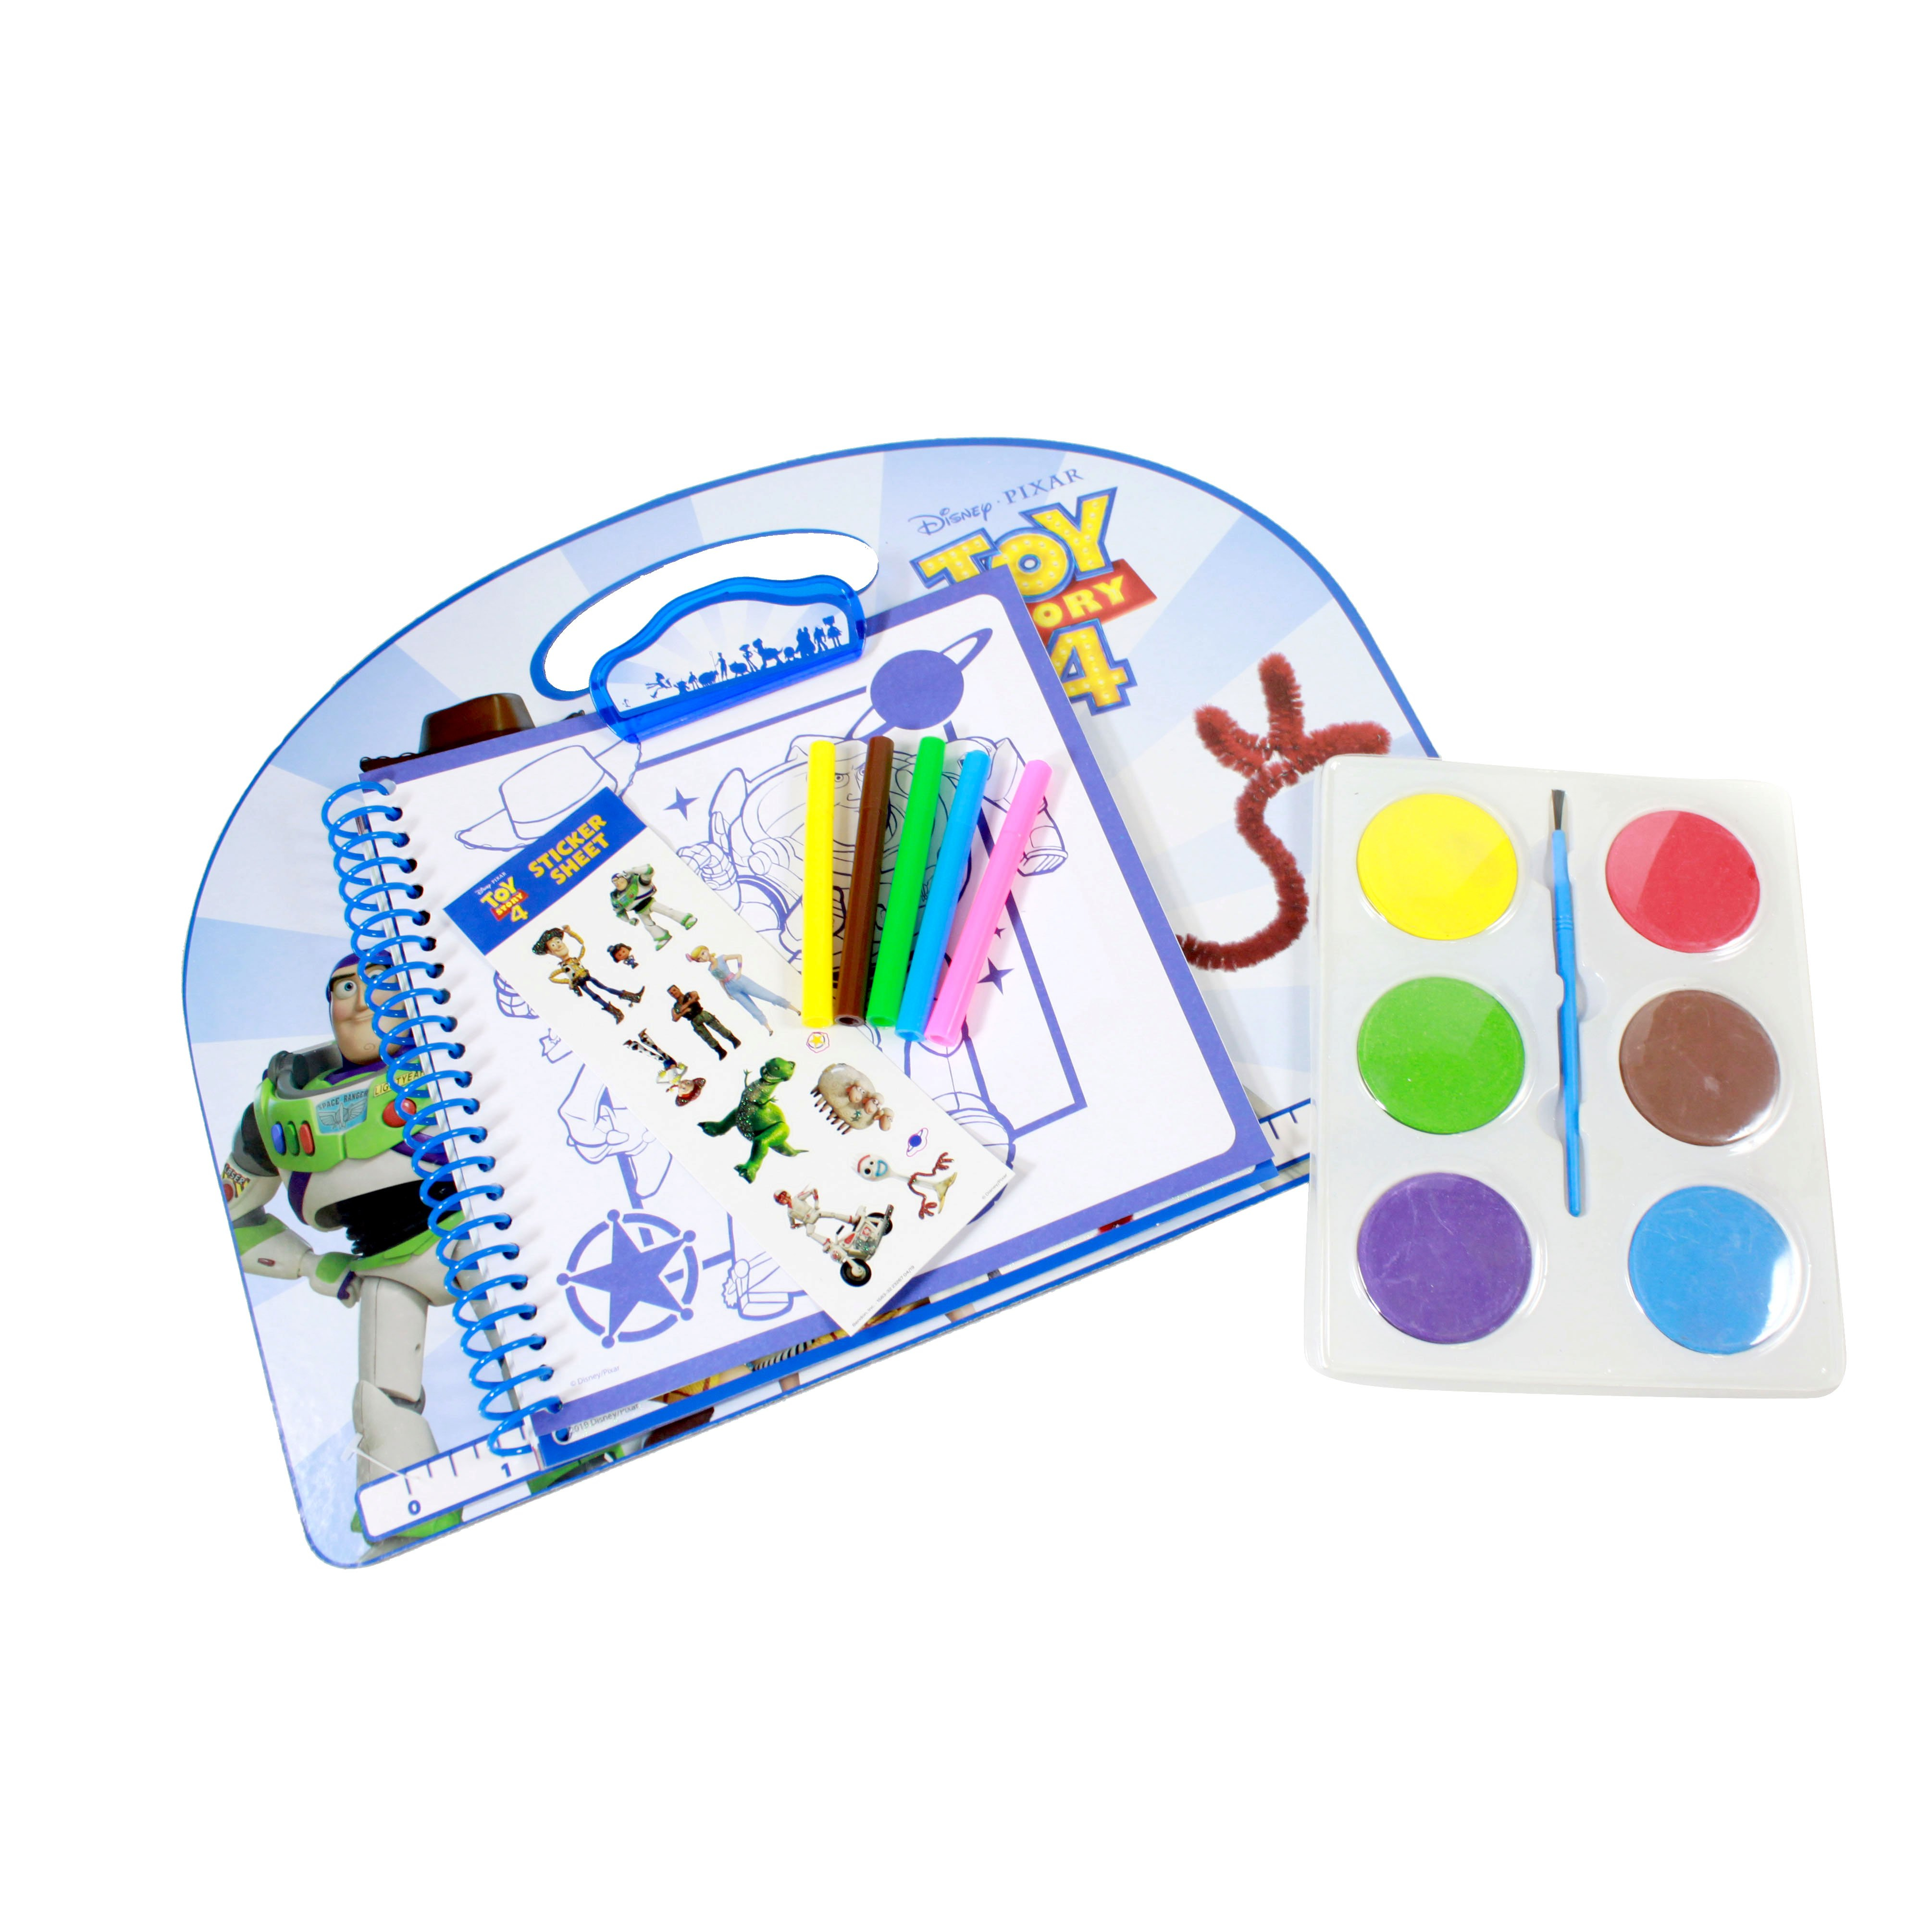 Disney Pixar Toy Story 4 Lapdesk Watercolor Paint Coloring Stickers Markers Activity Book Set Woody Buzz Creativity Center 27 Pieces